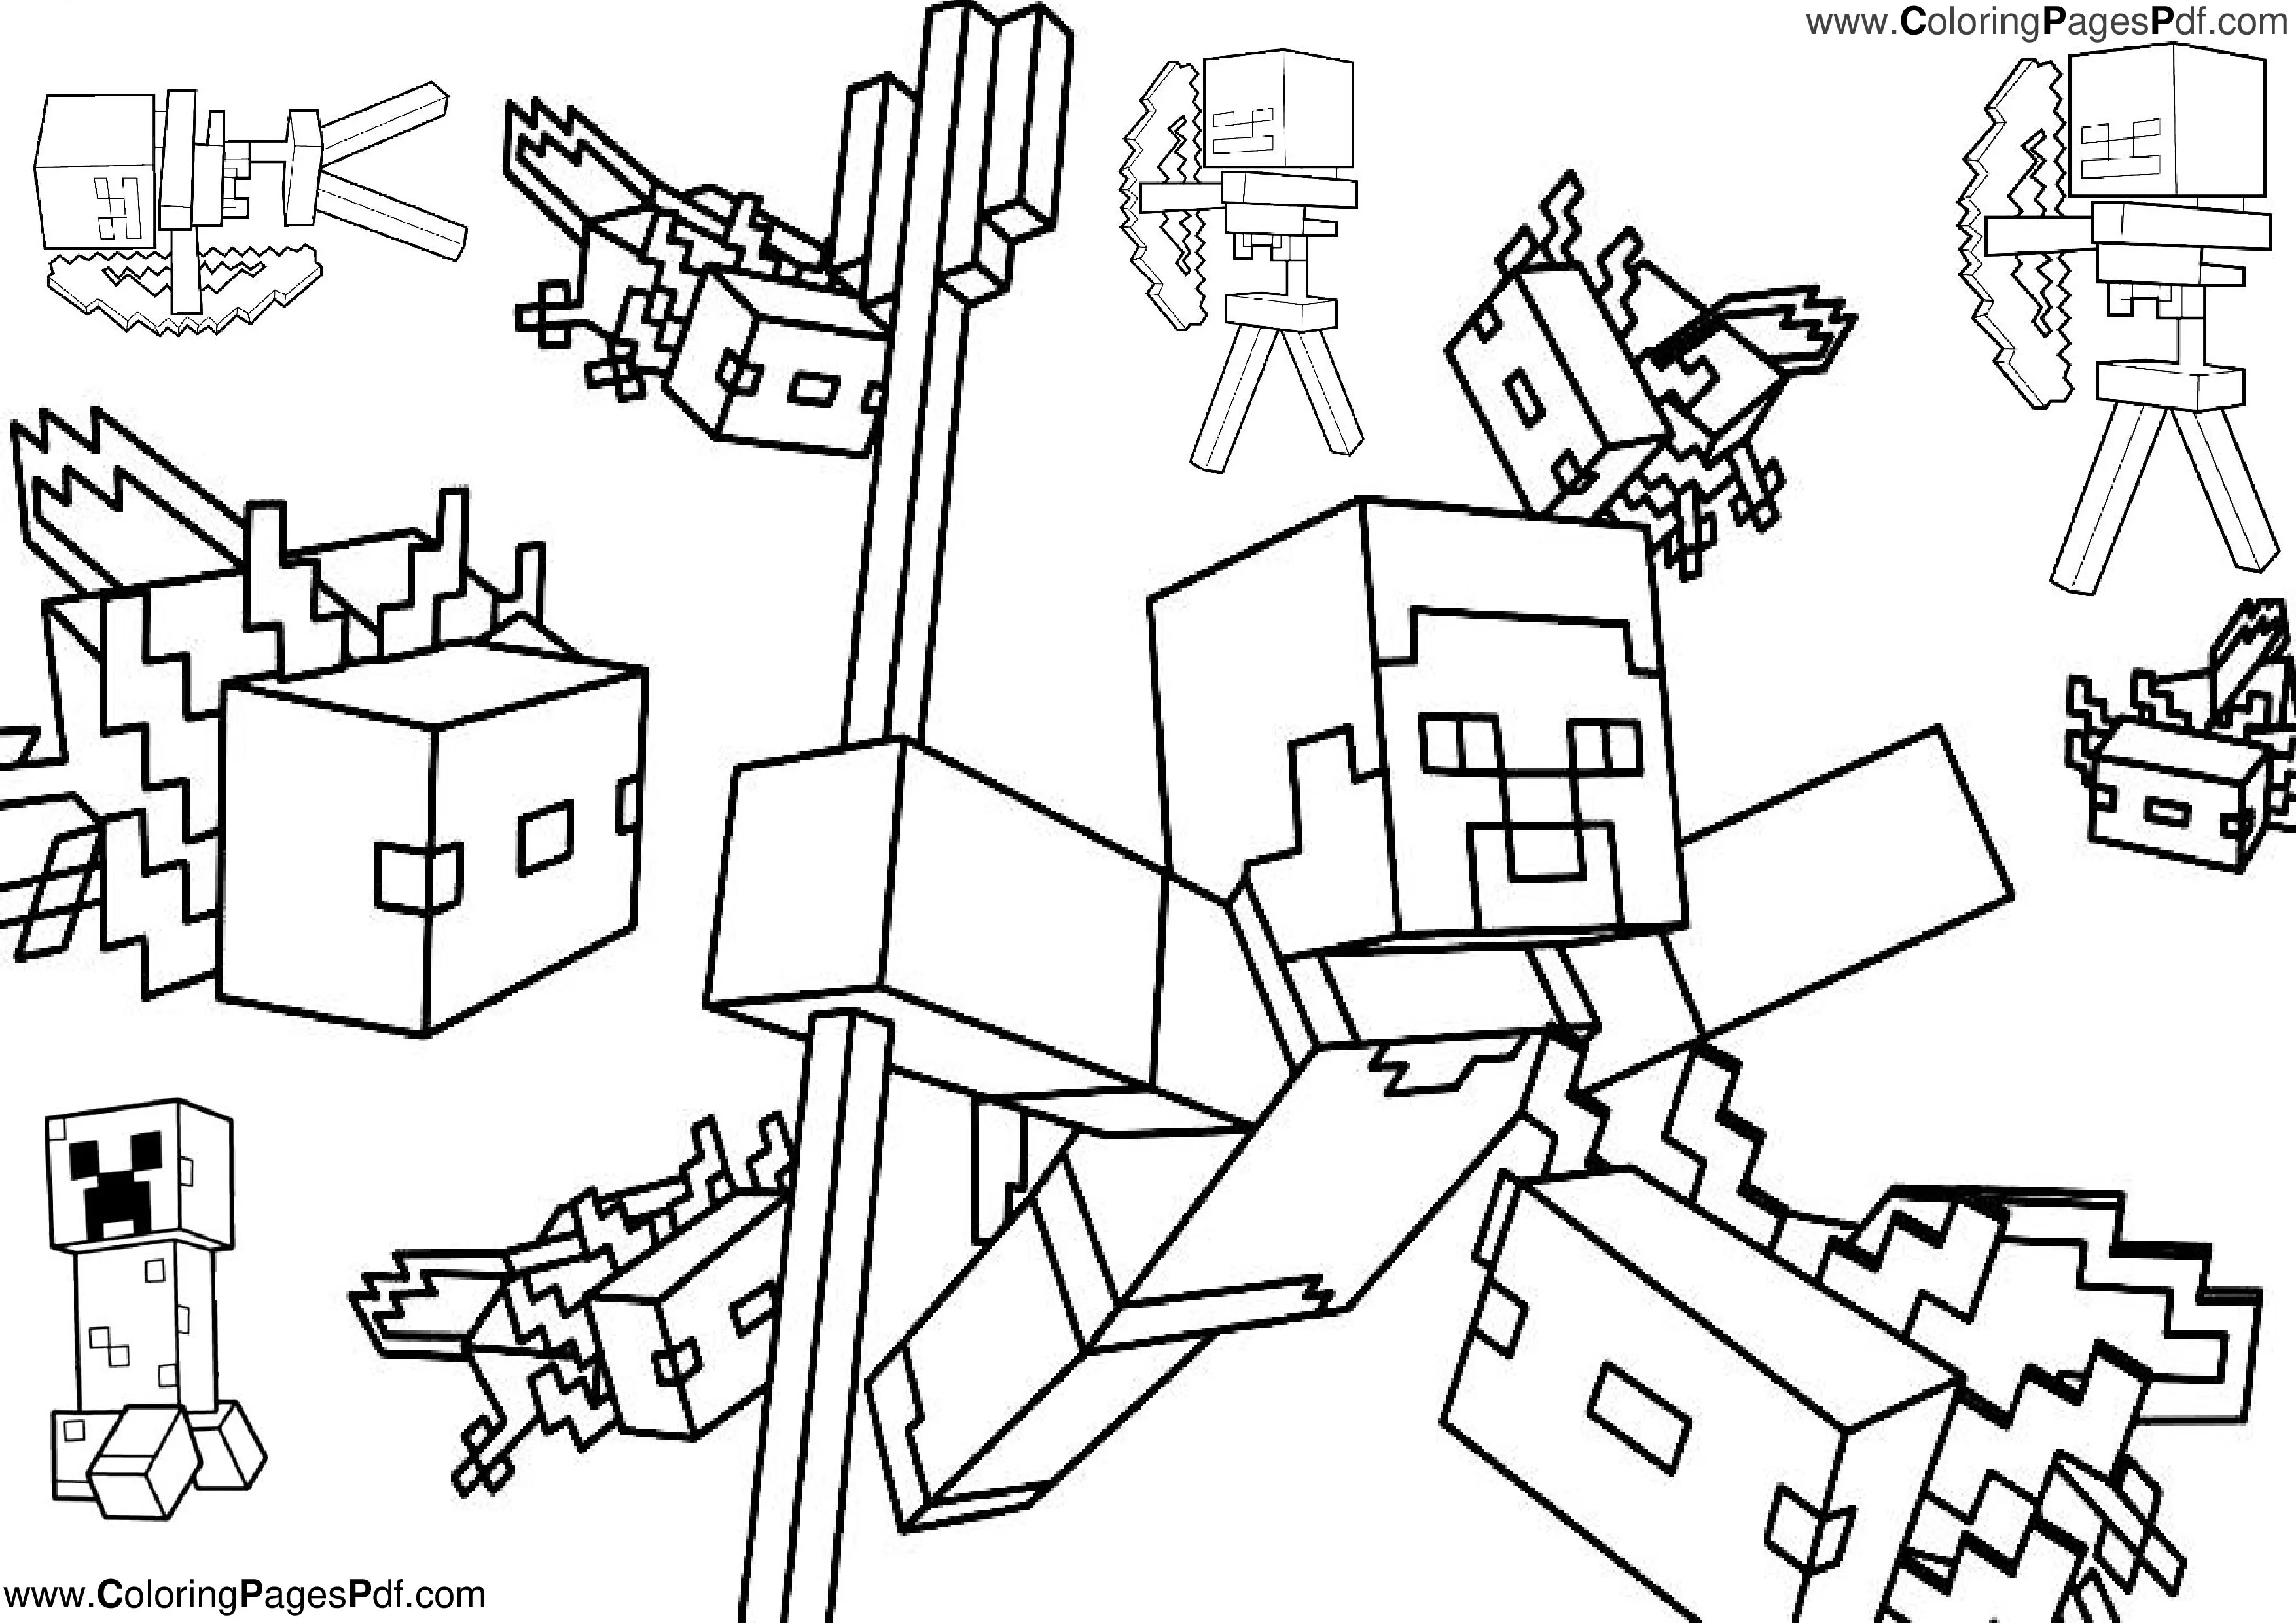 Minecraft coloring pages online